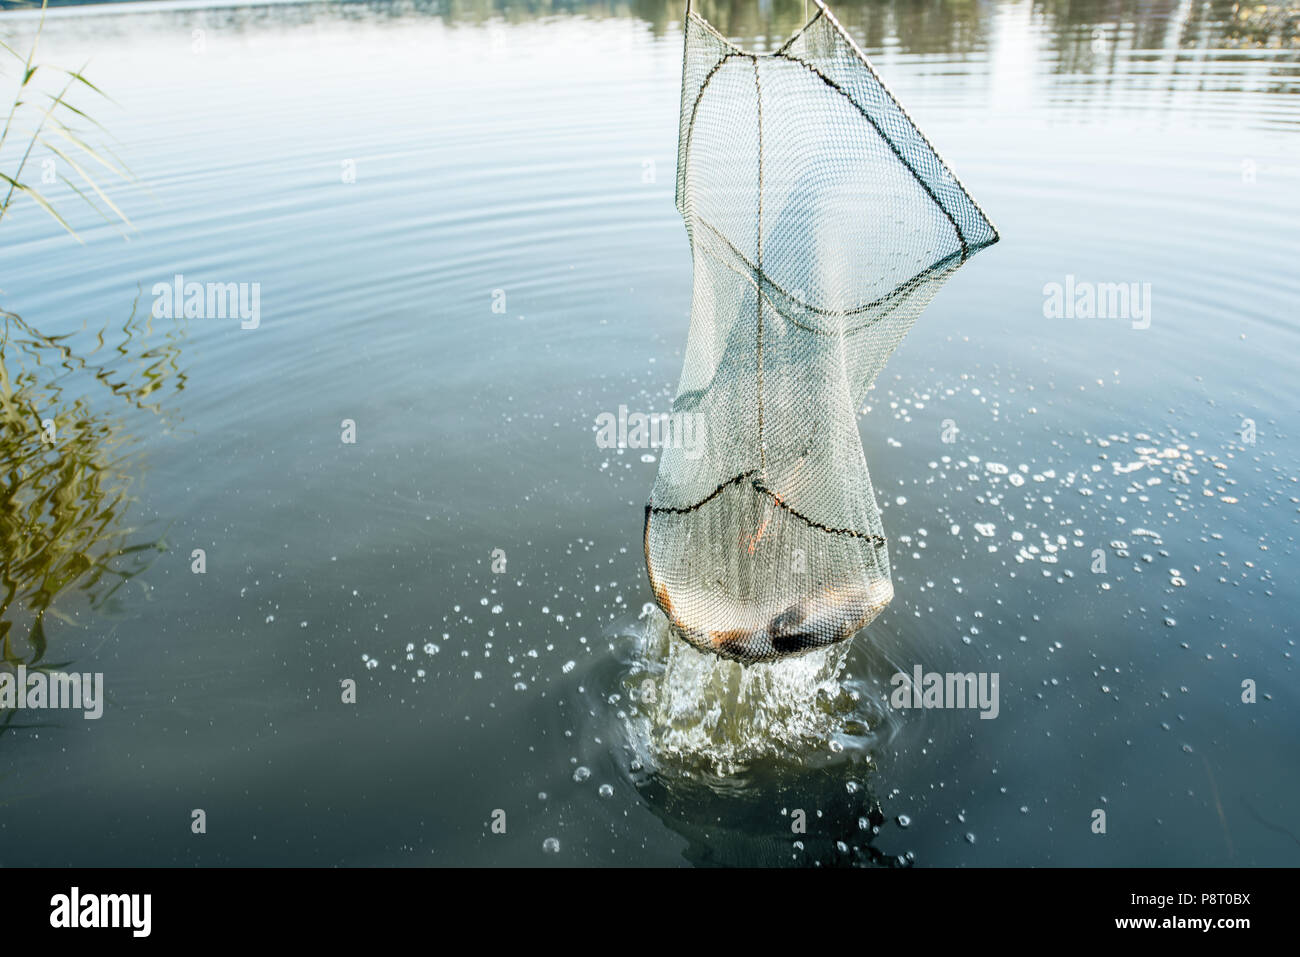 Catching fish with fishing net in the lake during the morning